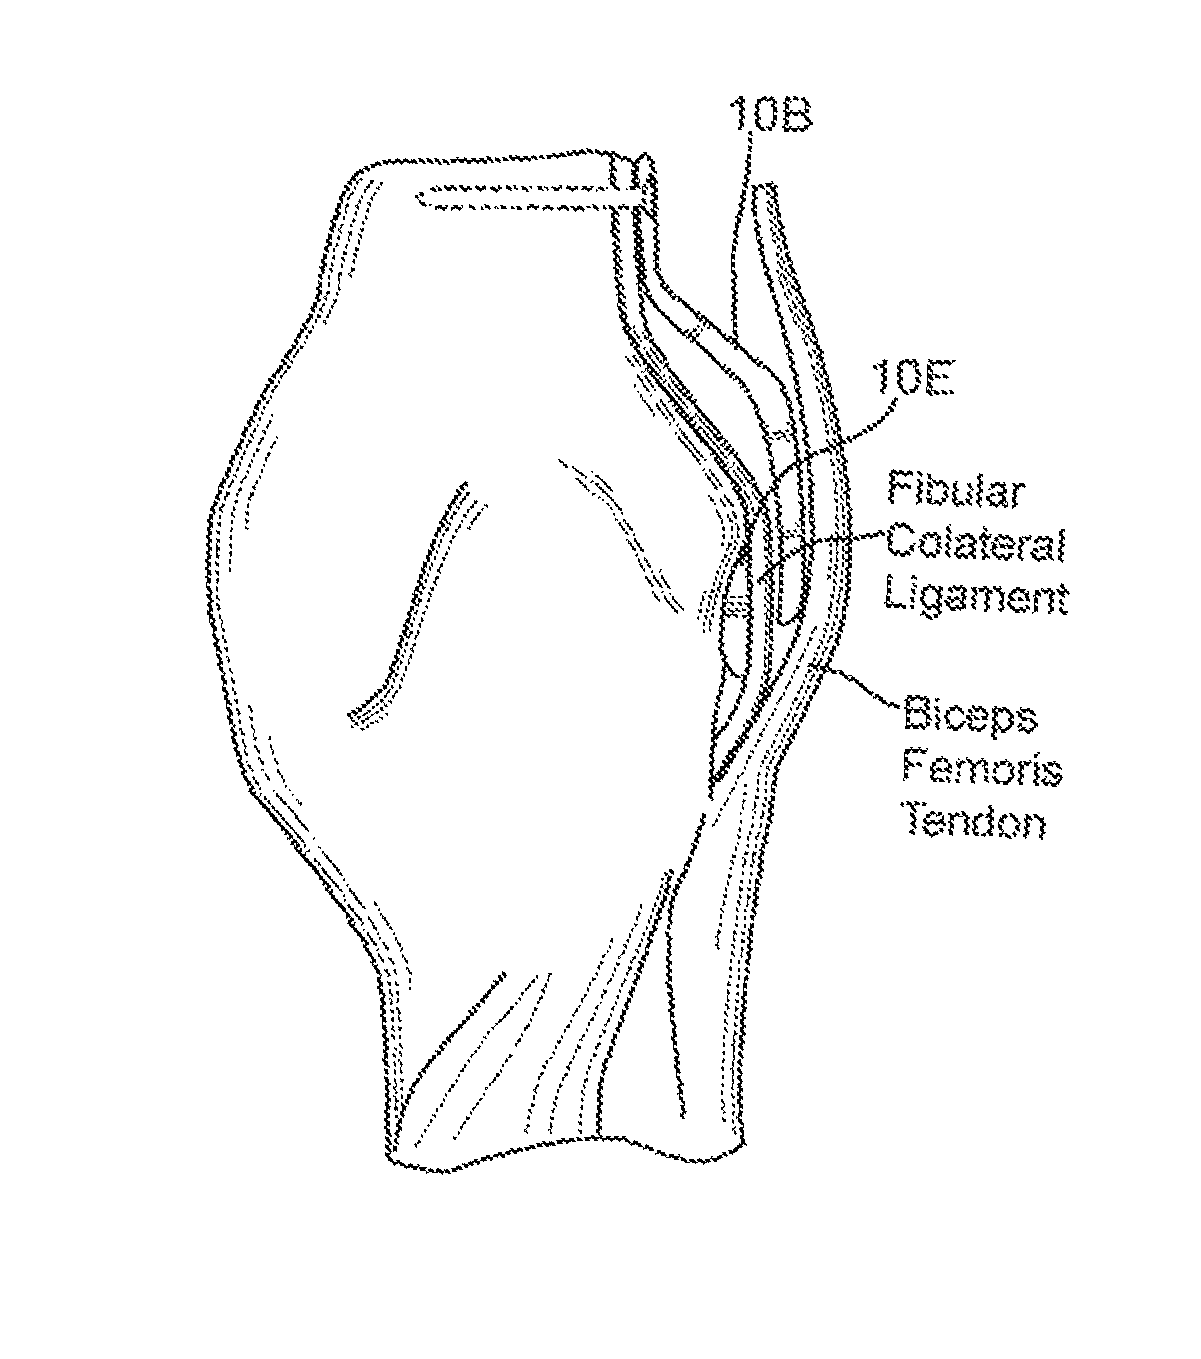 Method and apparatus for force redistribution in articular joints